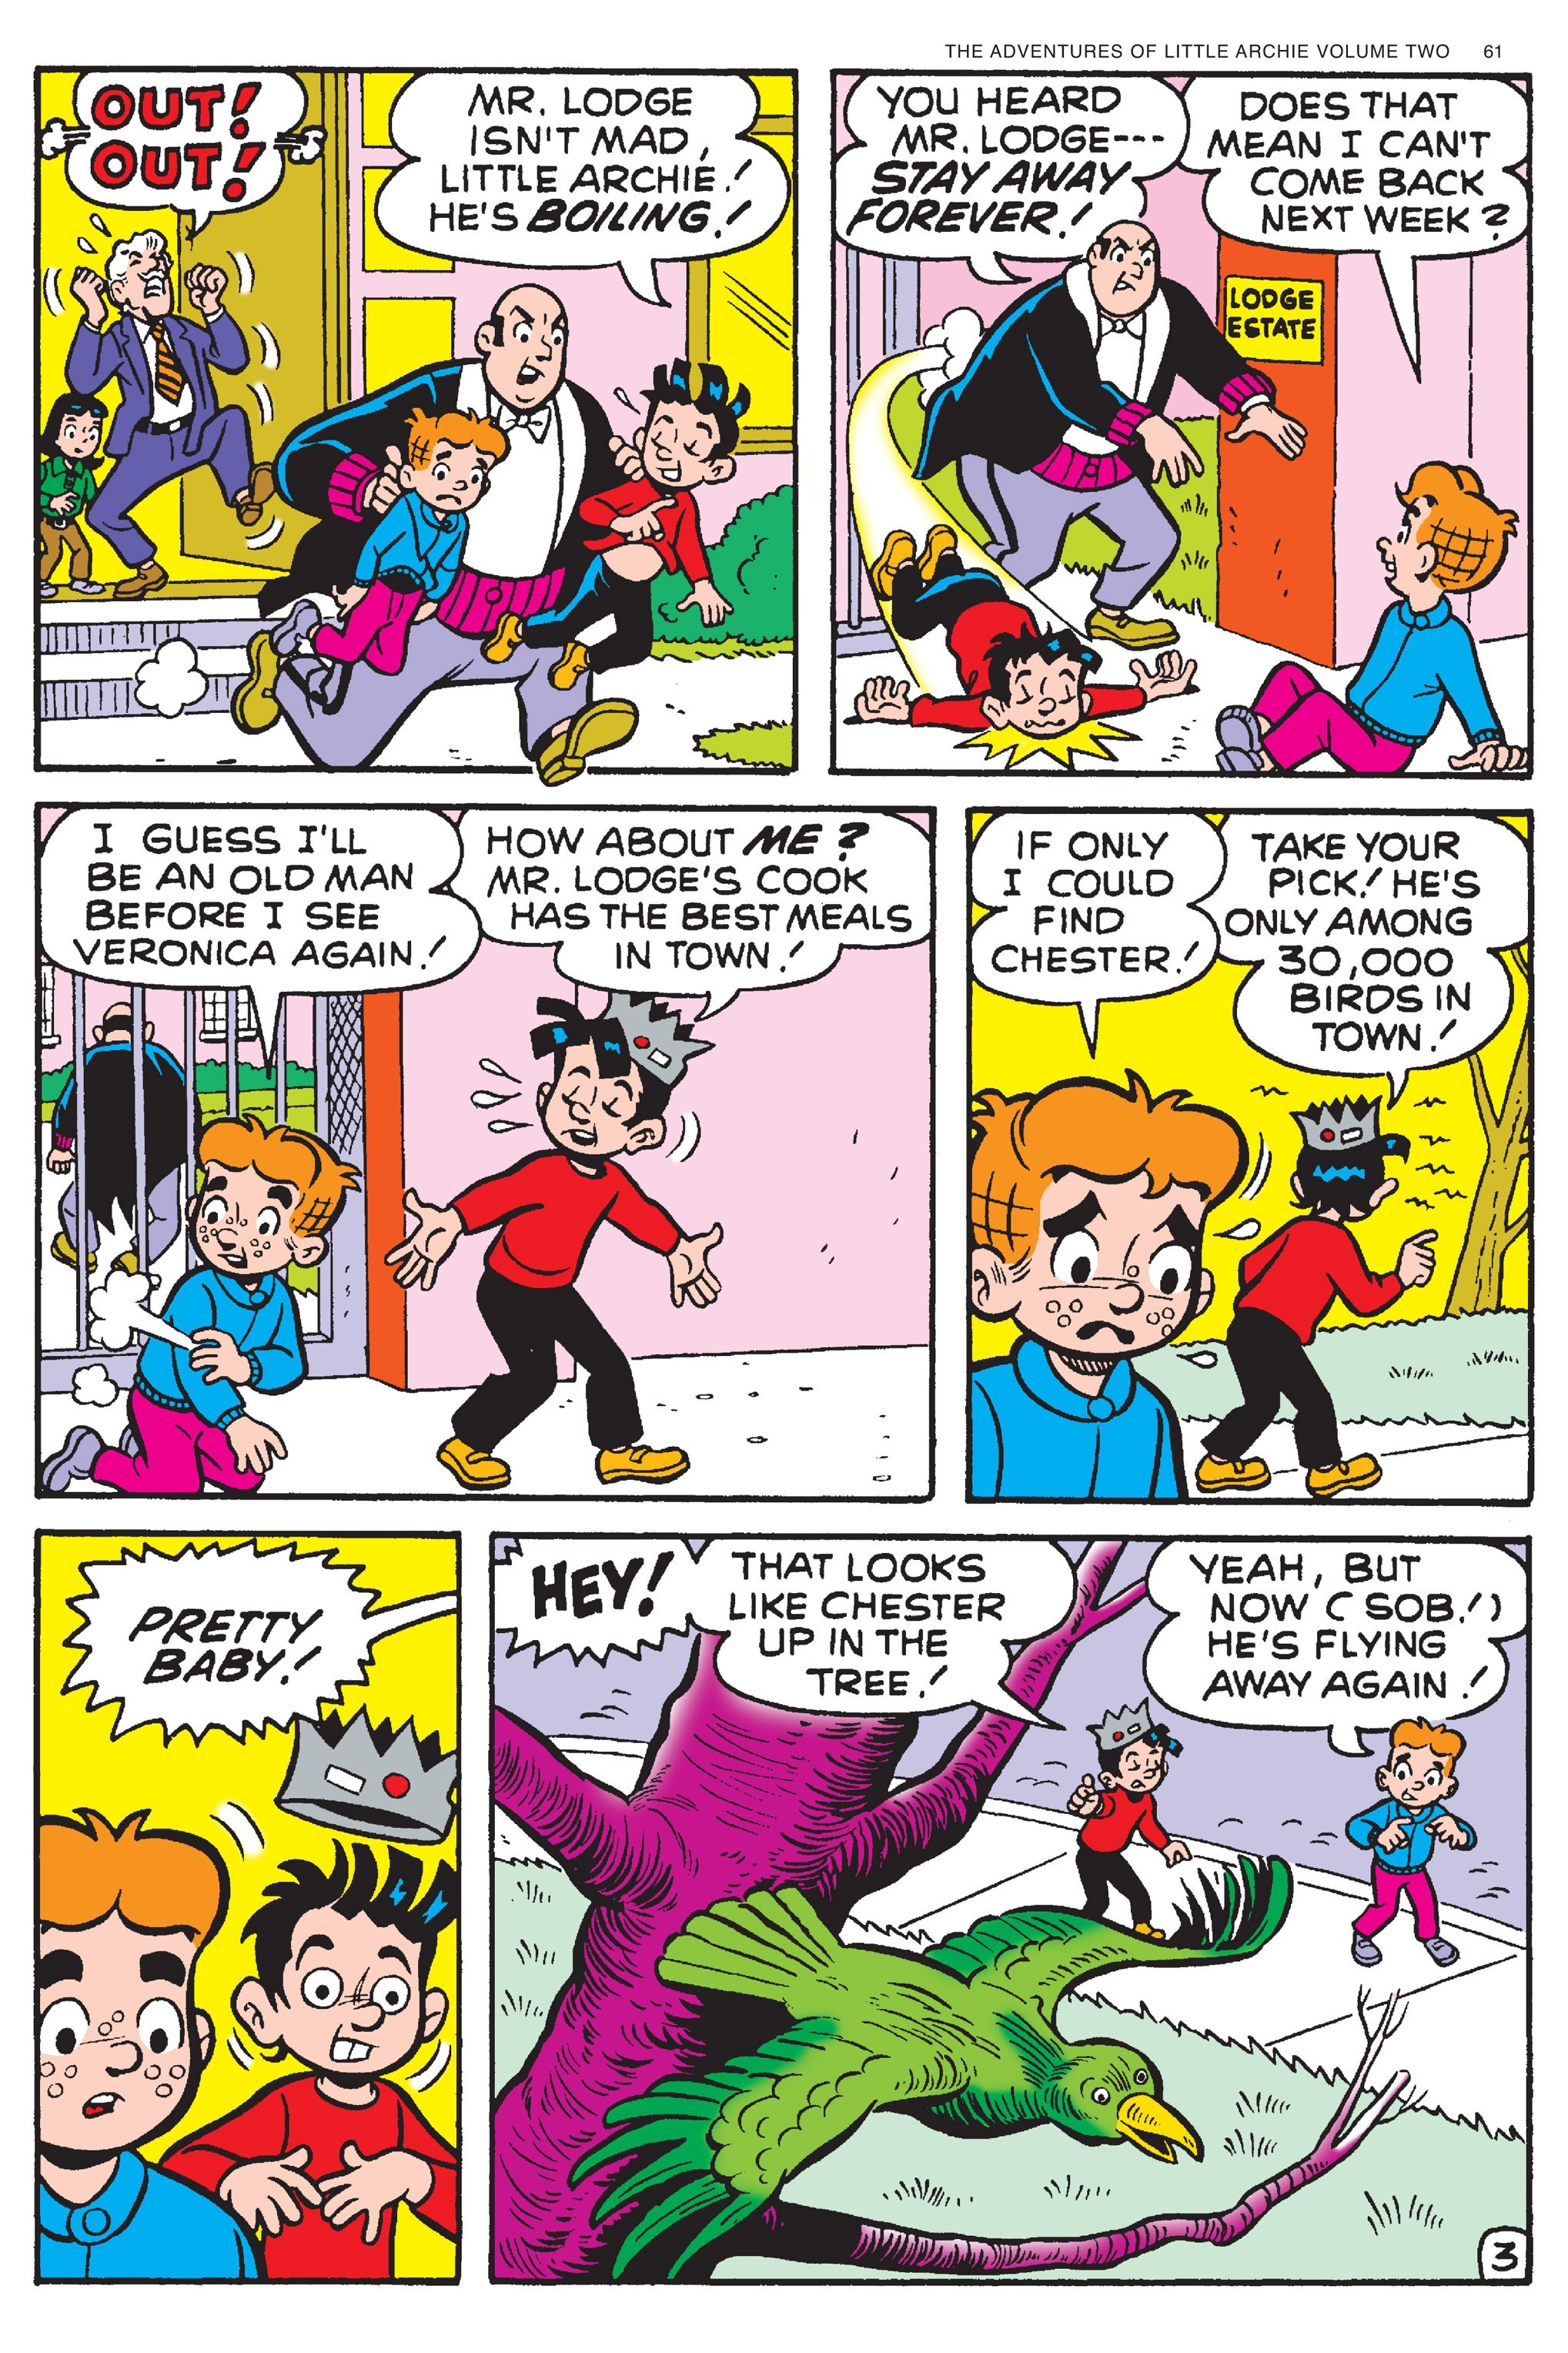 Read online Adventures of Little Archie comic -  Issue # TPB 2 - 62